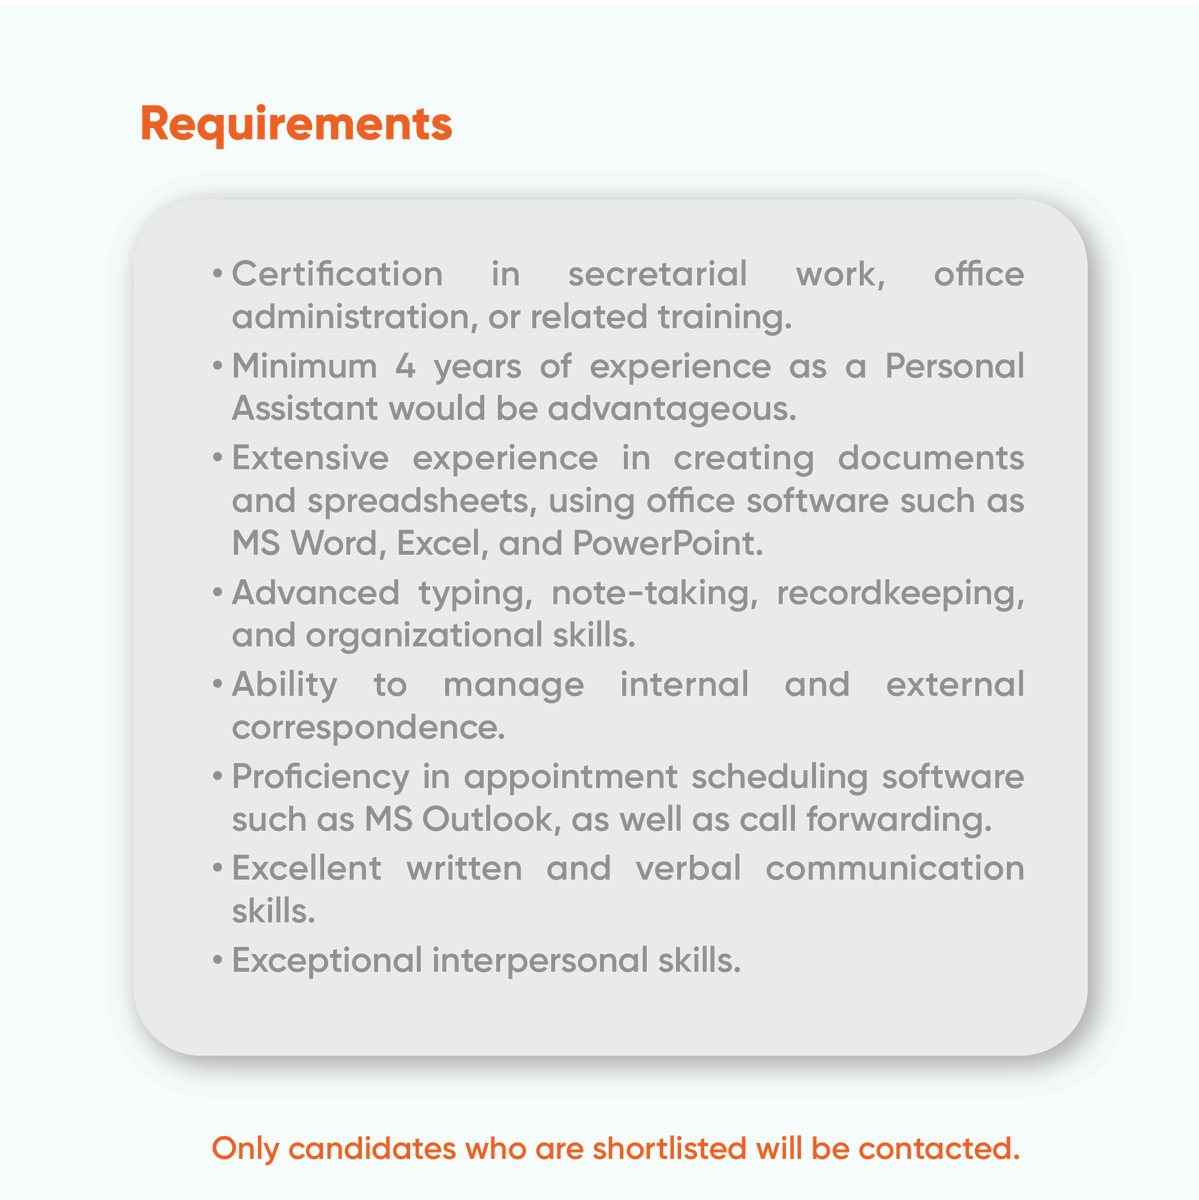 To be considered for the job, please apply by sending your application to jobs@shugulika.com.

Please note that only candidates who are shortlisted will be contacted.

#PersonalAssistantJobs #ExecutiveAssistantJob #PAtoCEOJobs #ExecutiveSupportJobs #ExecutiveSecretaryJobs